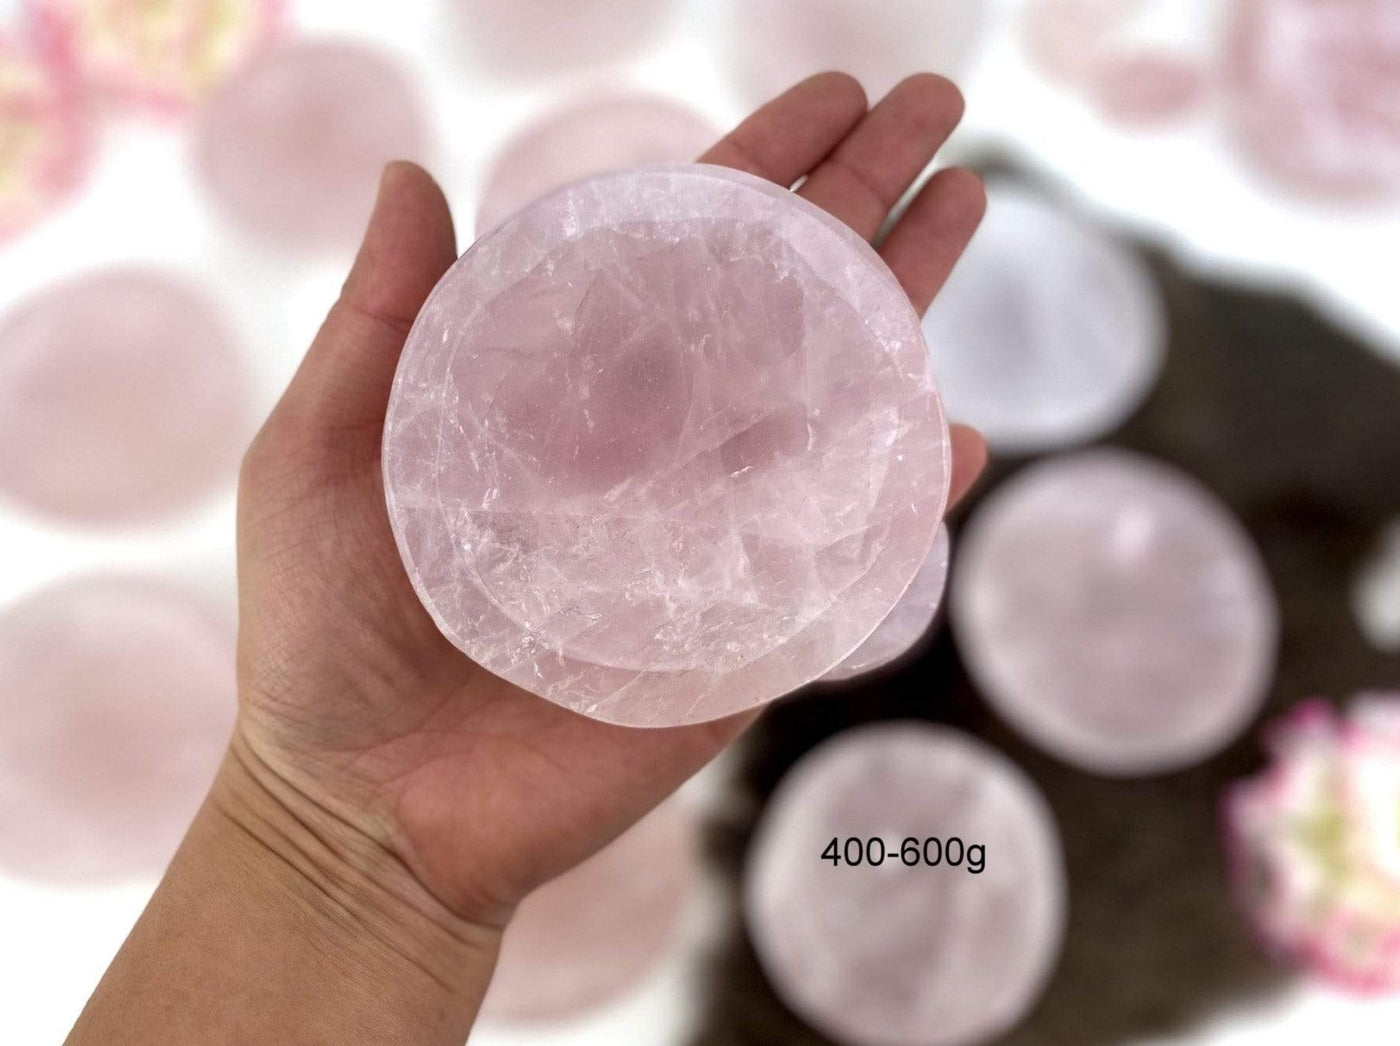 ahnd holding up 400-600g Rose Quartz Stone Round Dish with others blurred in the background